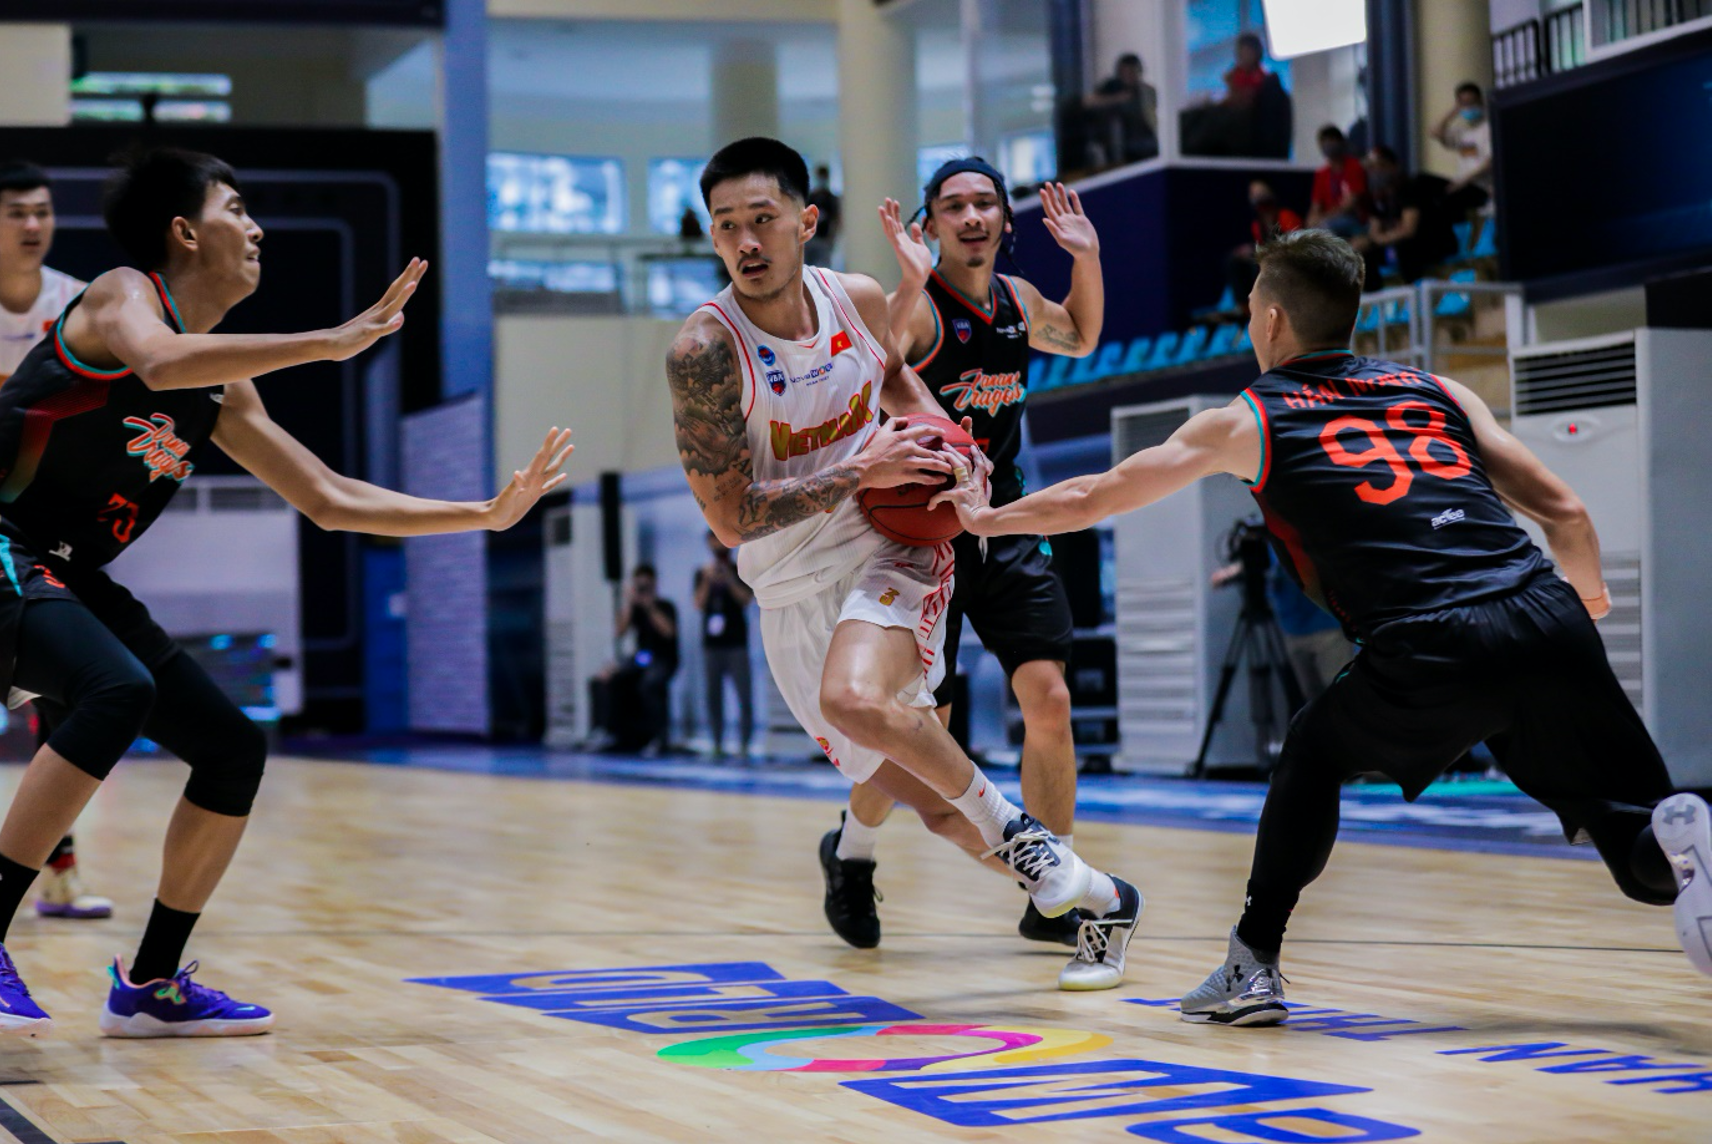 Khoa Tran (in white) of the Vietnamese national basketball team is pictured in a game against Danang Dragons. Photo: VBA